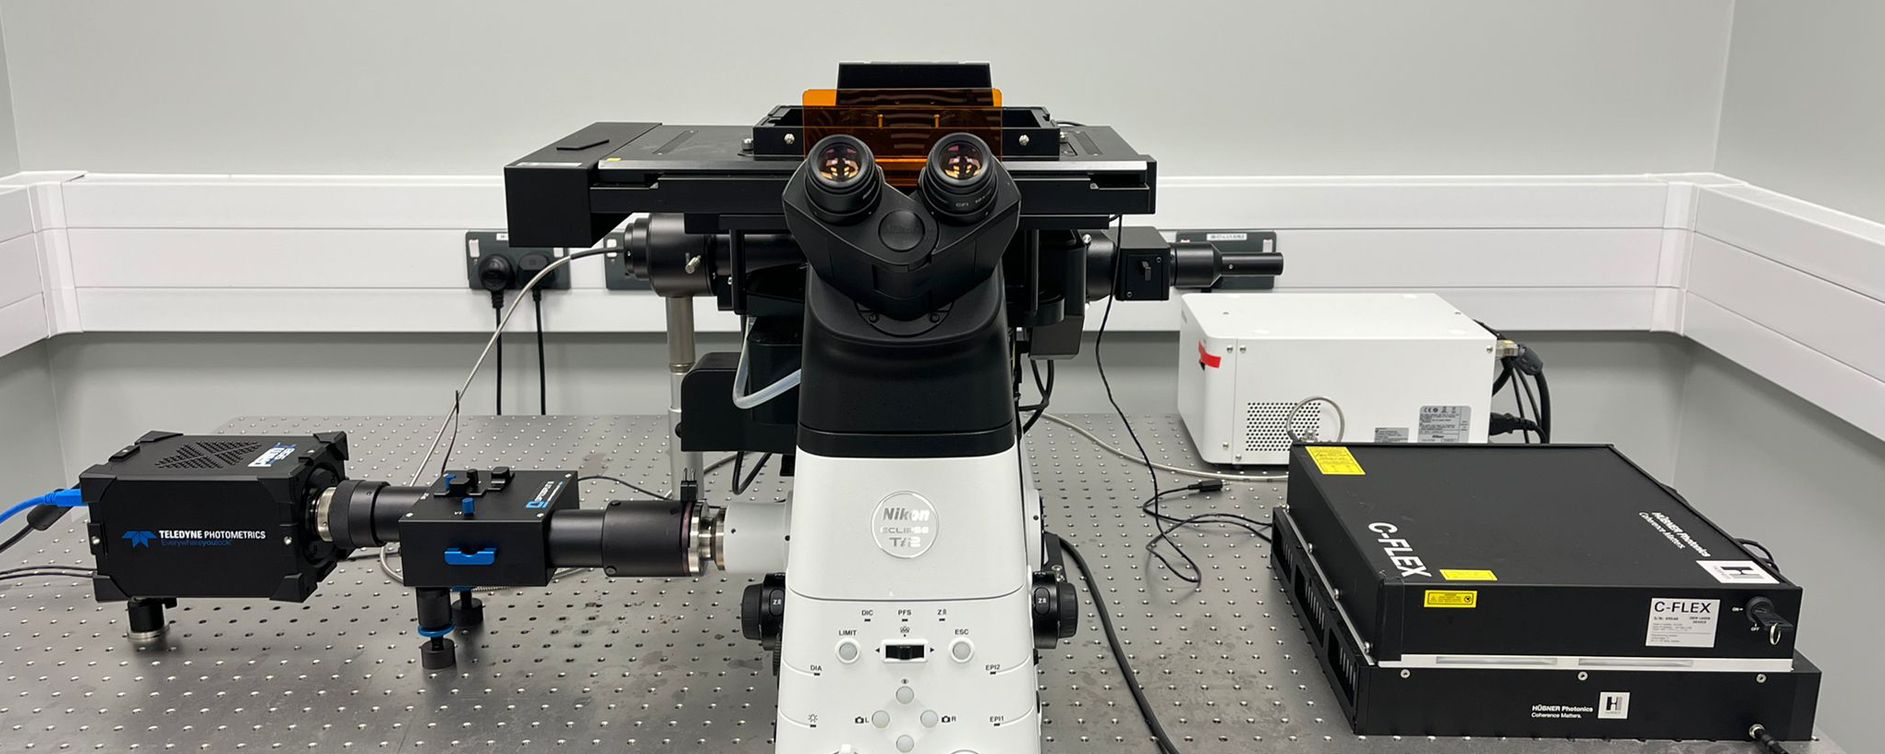 Photograph of the super resolution microscope in the lab